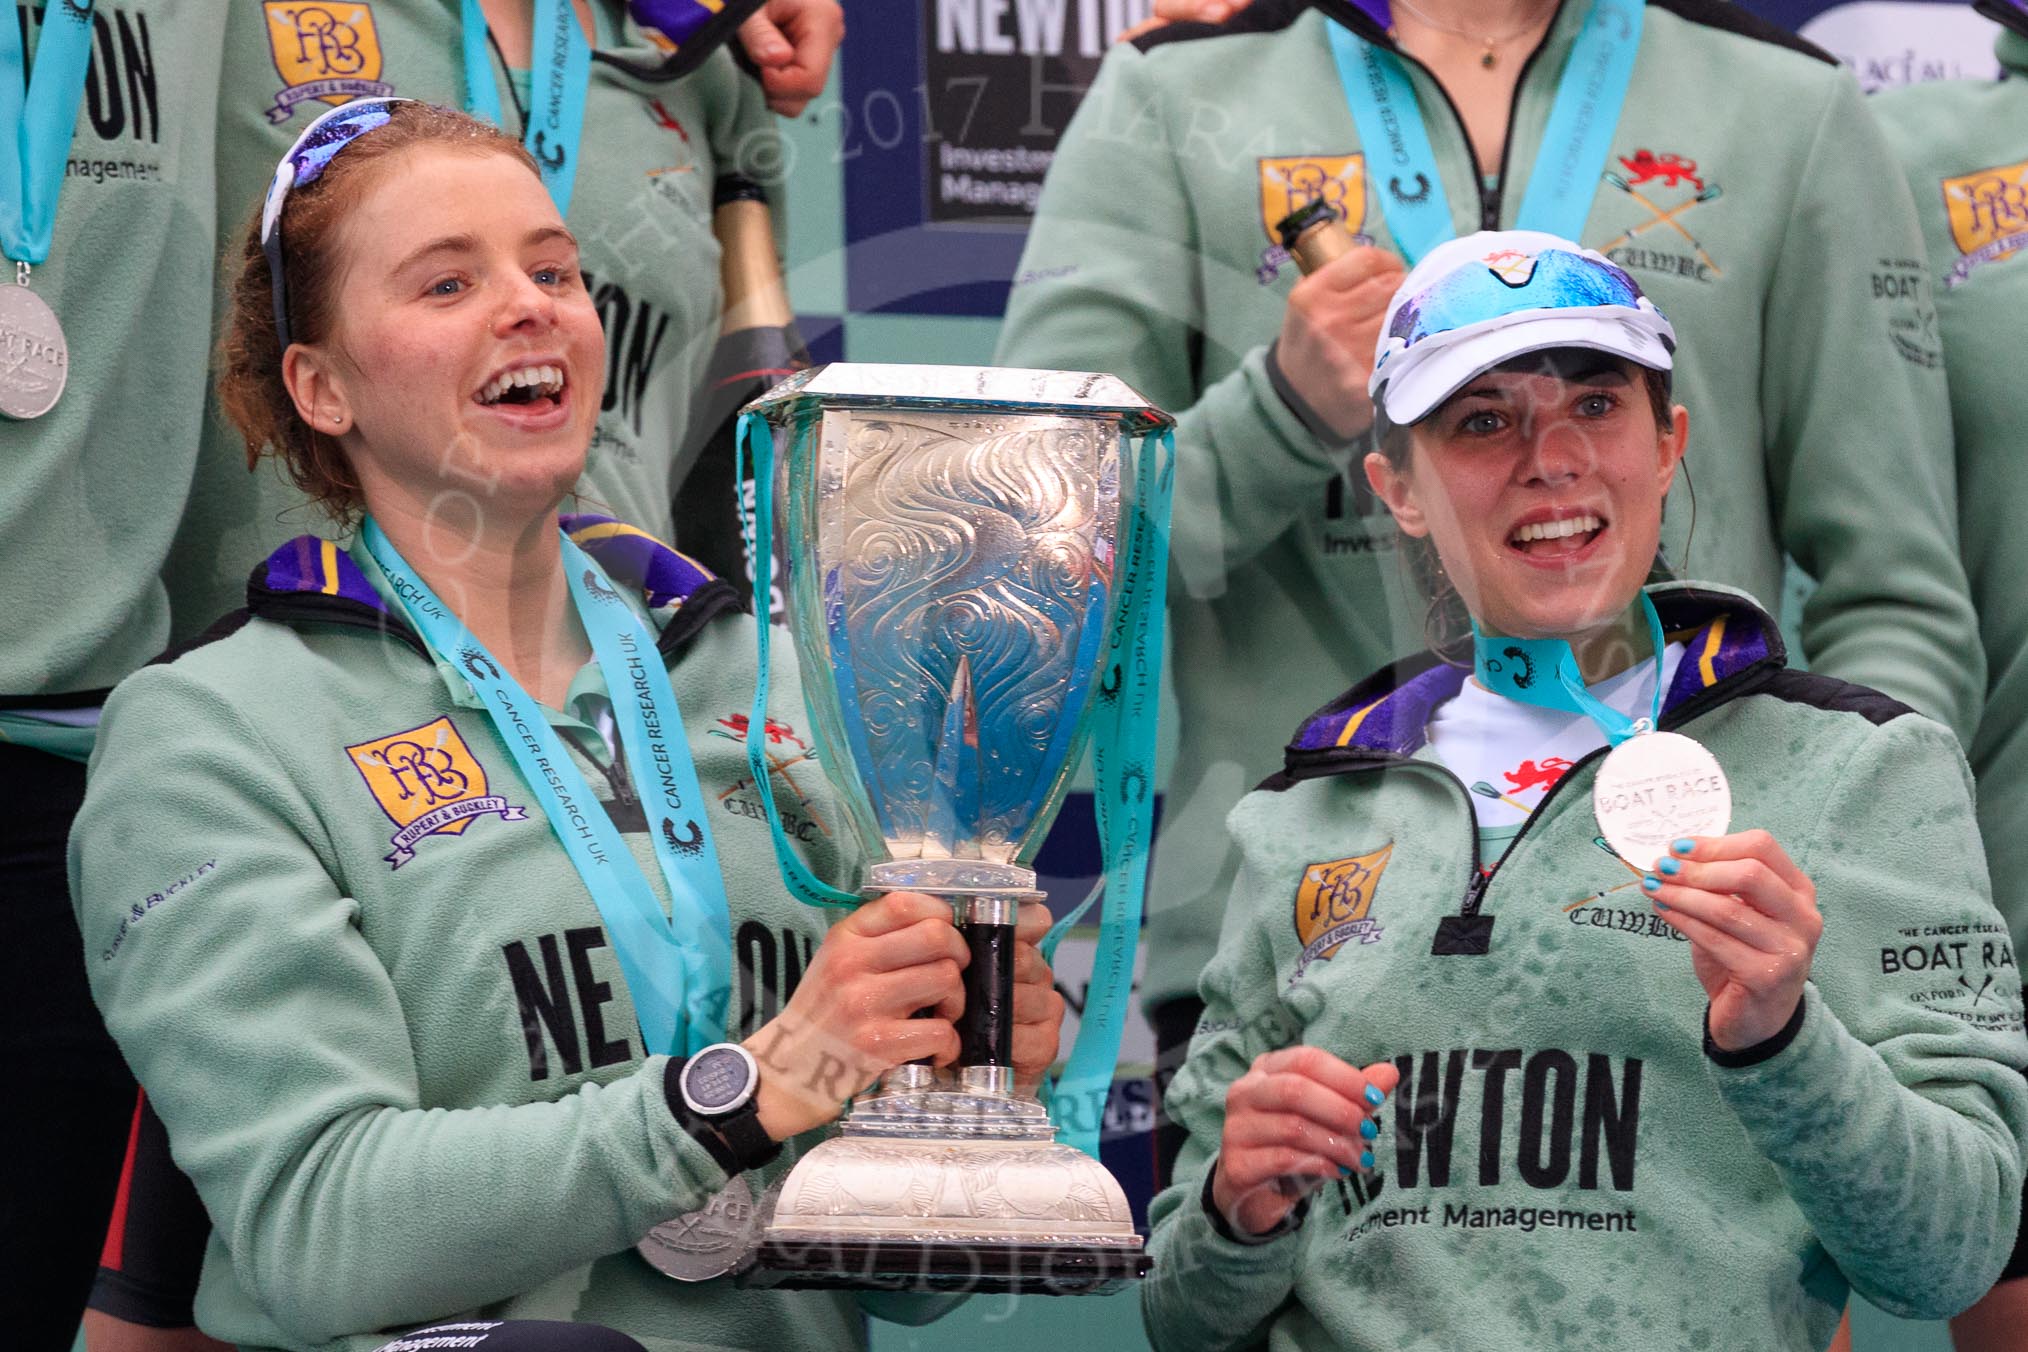 The Cancer Research UK Women's Boat Race 2018: The Cambridge women celebrating with their Boat Race medals, the Women's Boat Race trophy, and lots of Chapel Down Brut: Here Alice White, and Sophie Shapter.
River Thames between Putney Bridge and Mortlake,
London SW15,

United Kingdom,
on 24 March 2018 at 17:09, image #298